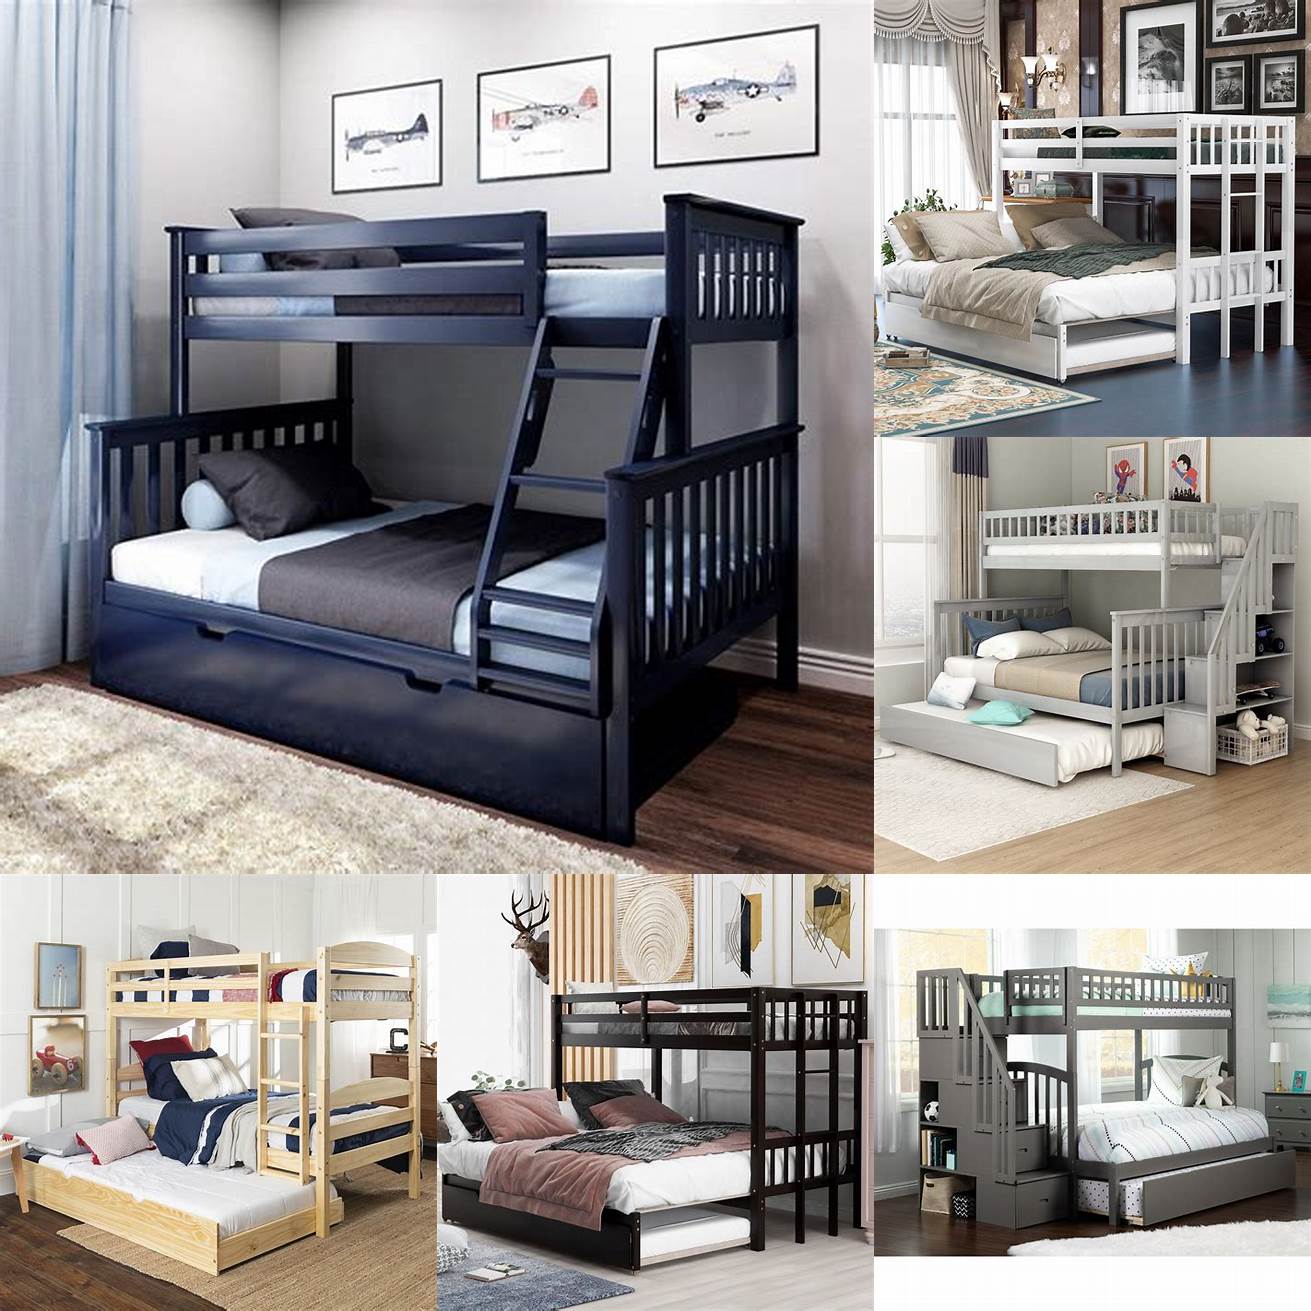 Bunk beds with trundle are perfect for kids rooms or vacation homes where you need to maximize sleeping space